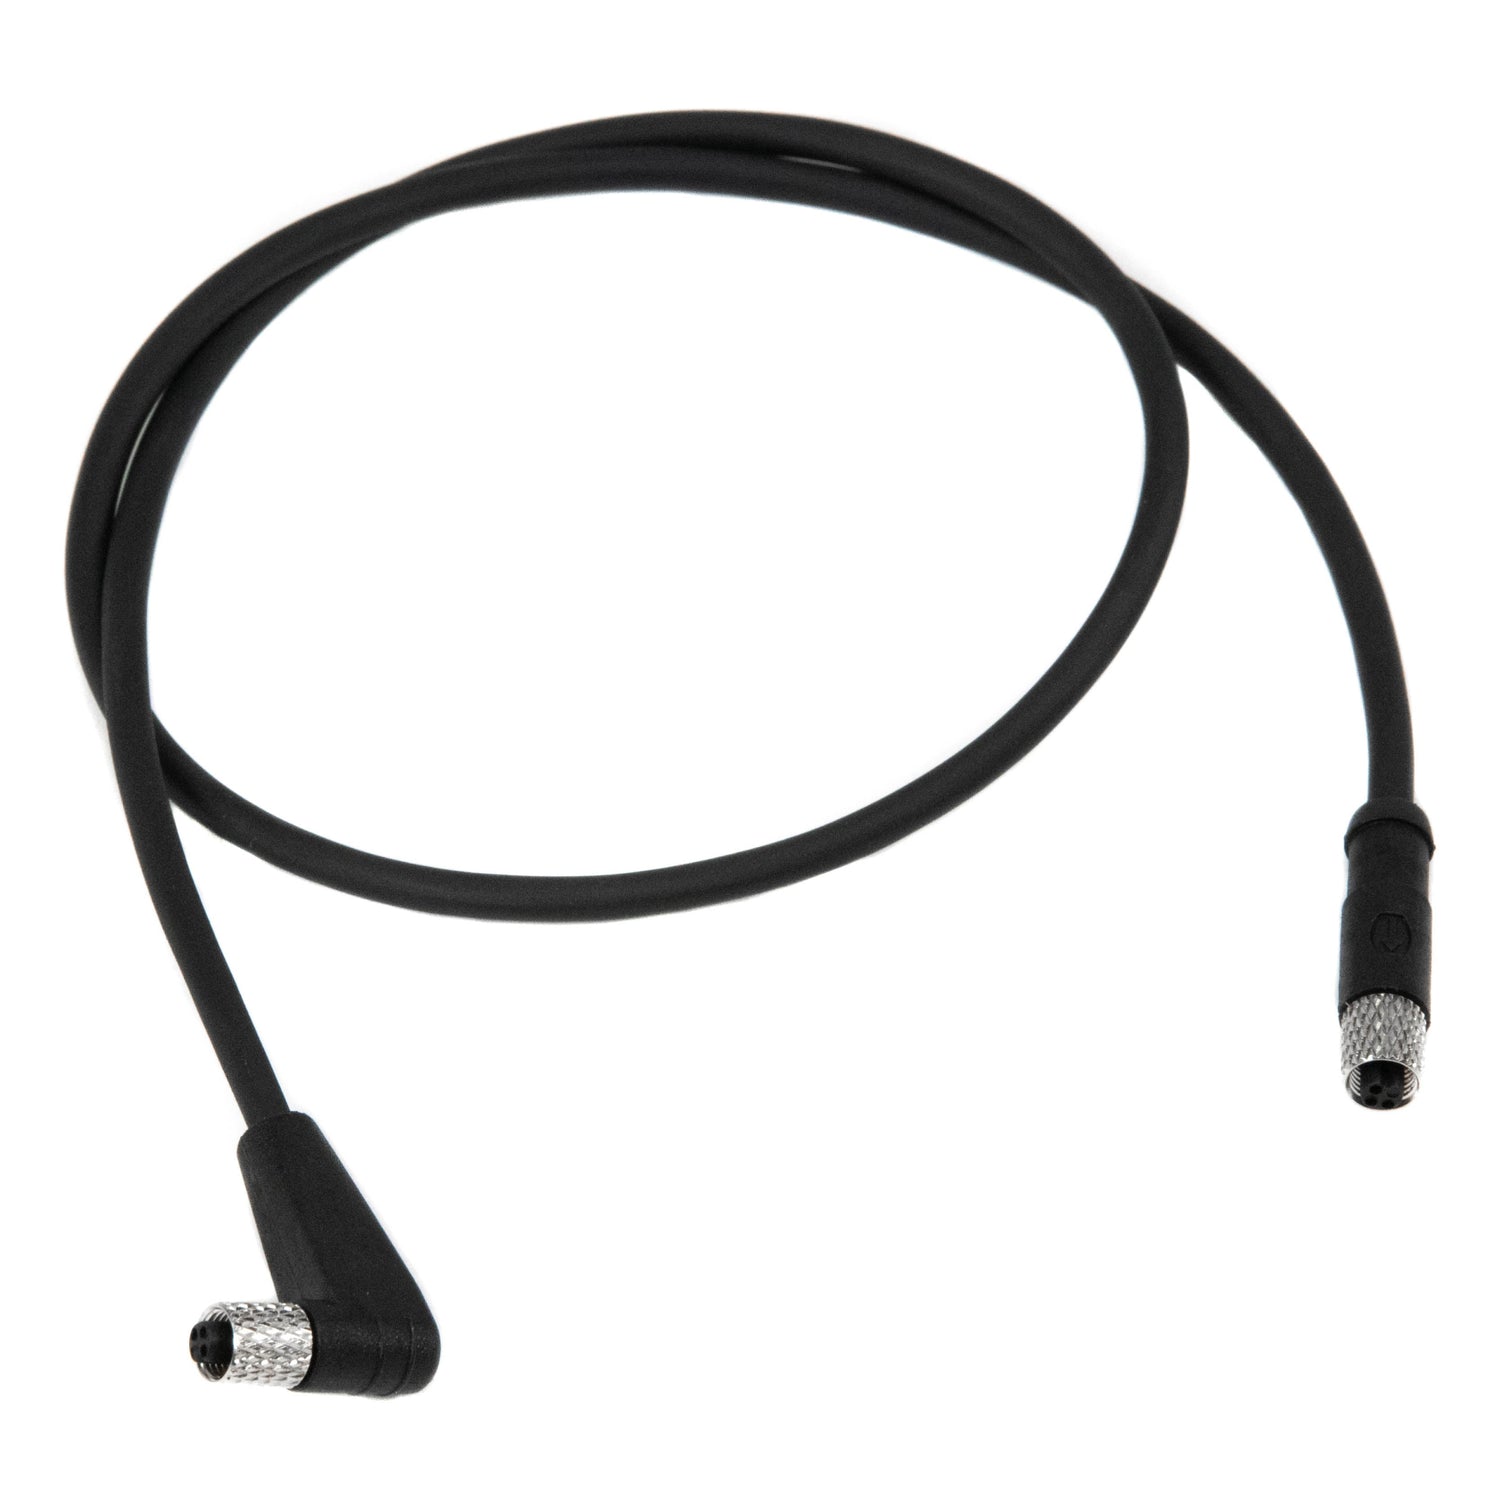 RIFE M5 Cables and Accessories